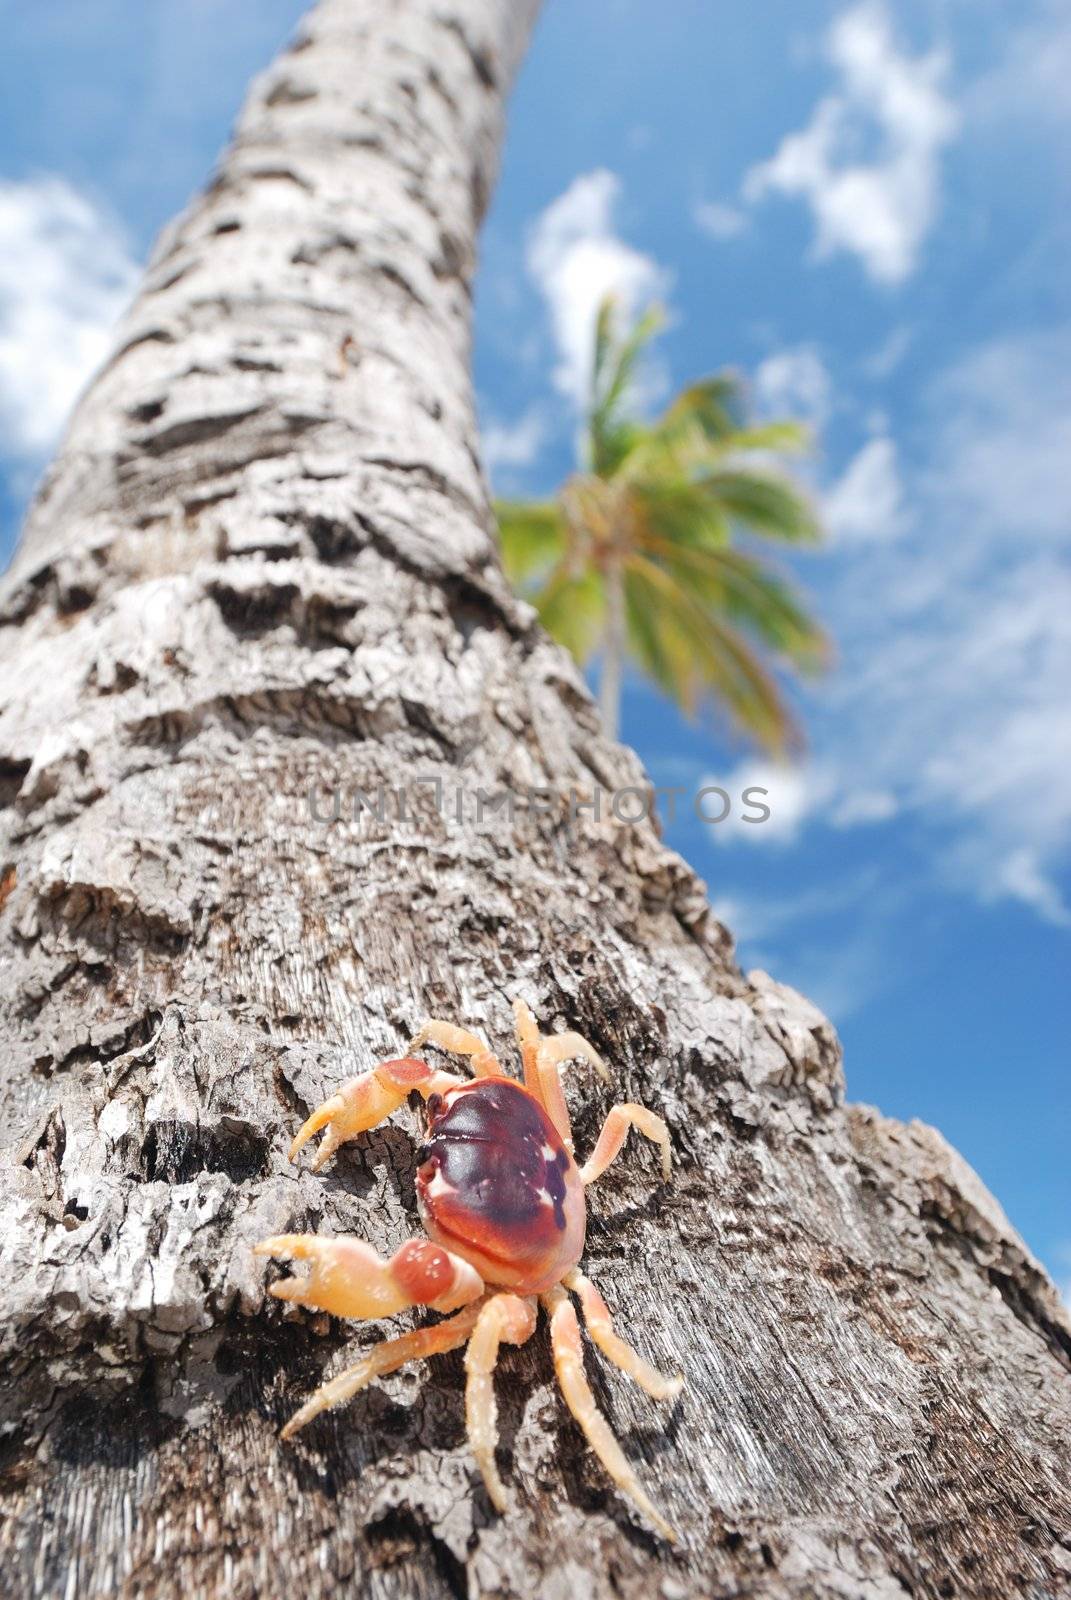 Crab on palm by haveseen